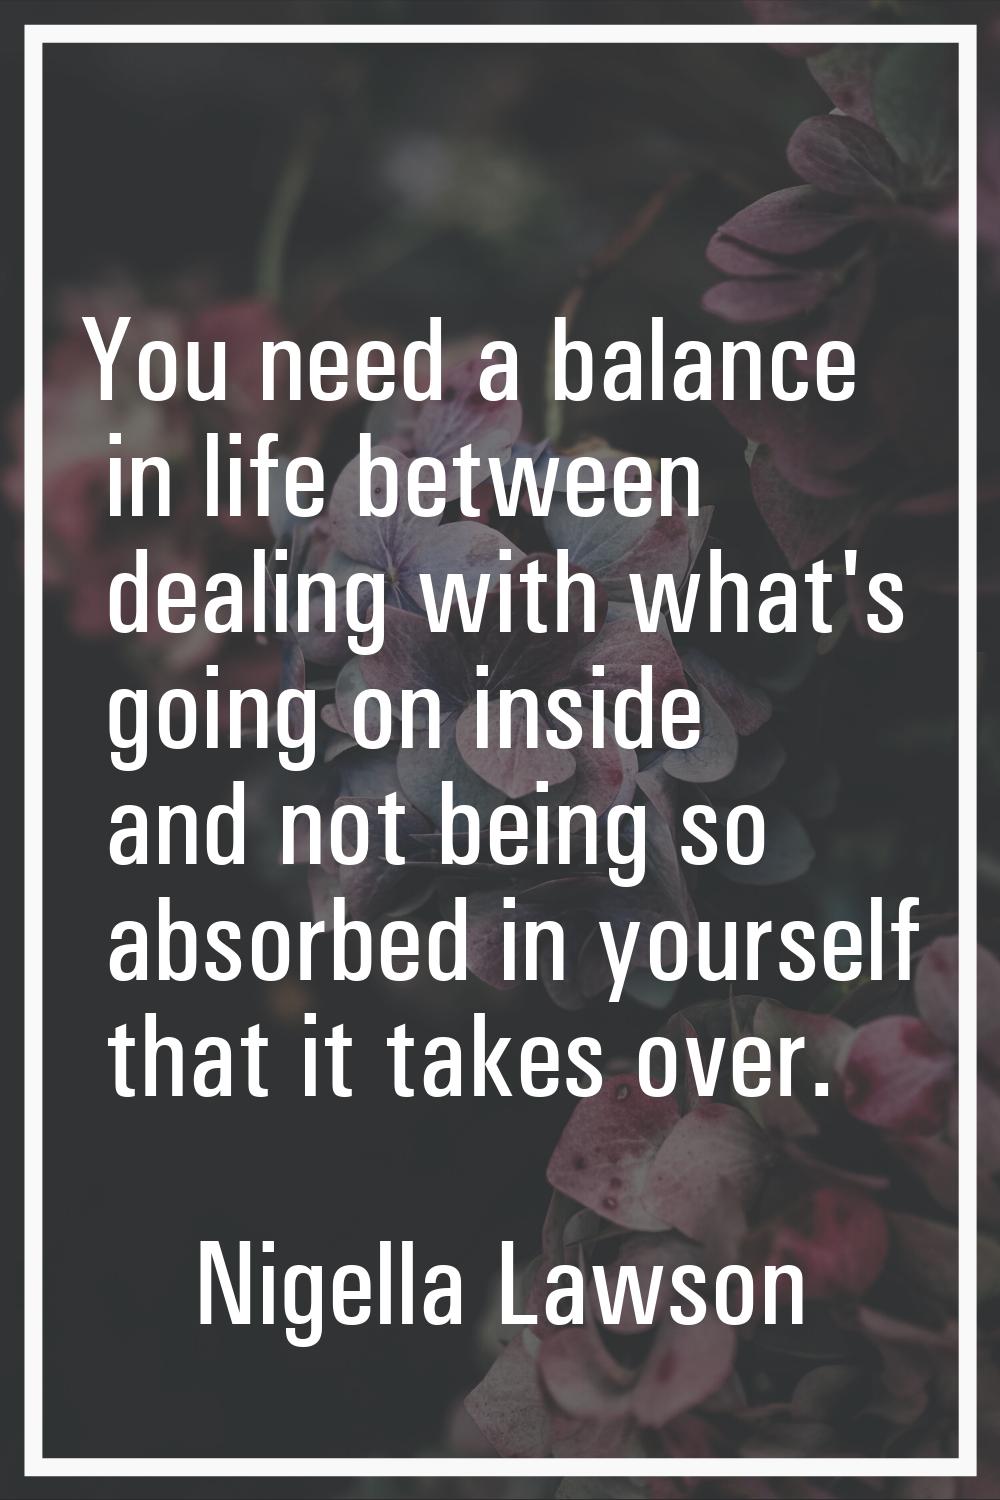 You need a balance in life between dealing with what's going on inside and not being so absorbed in